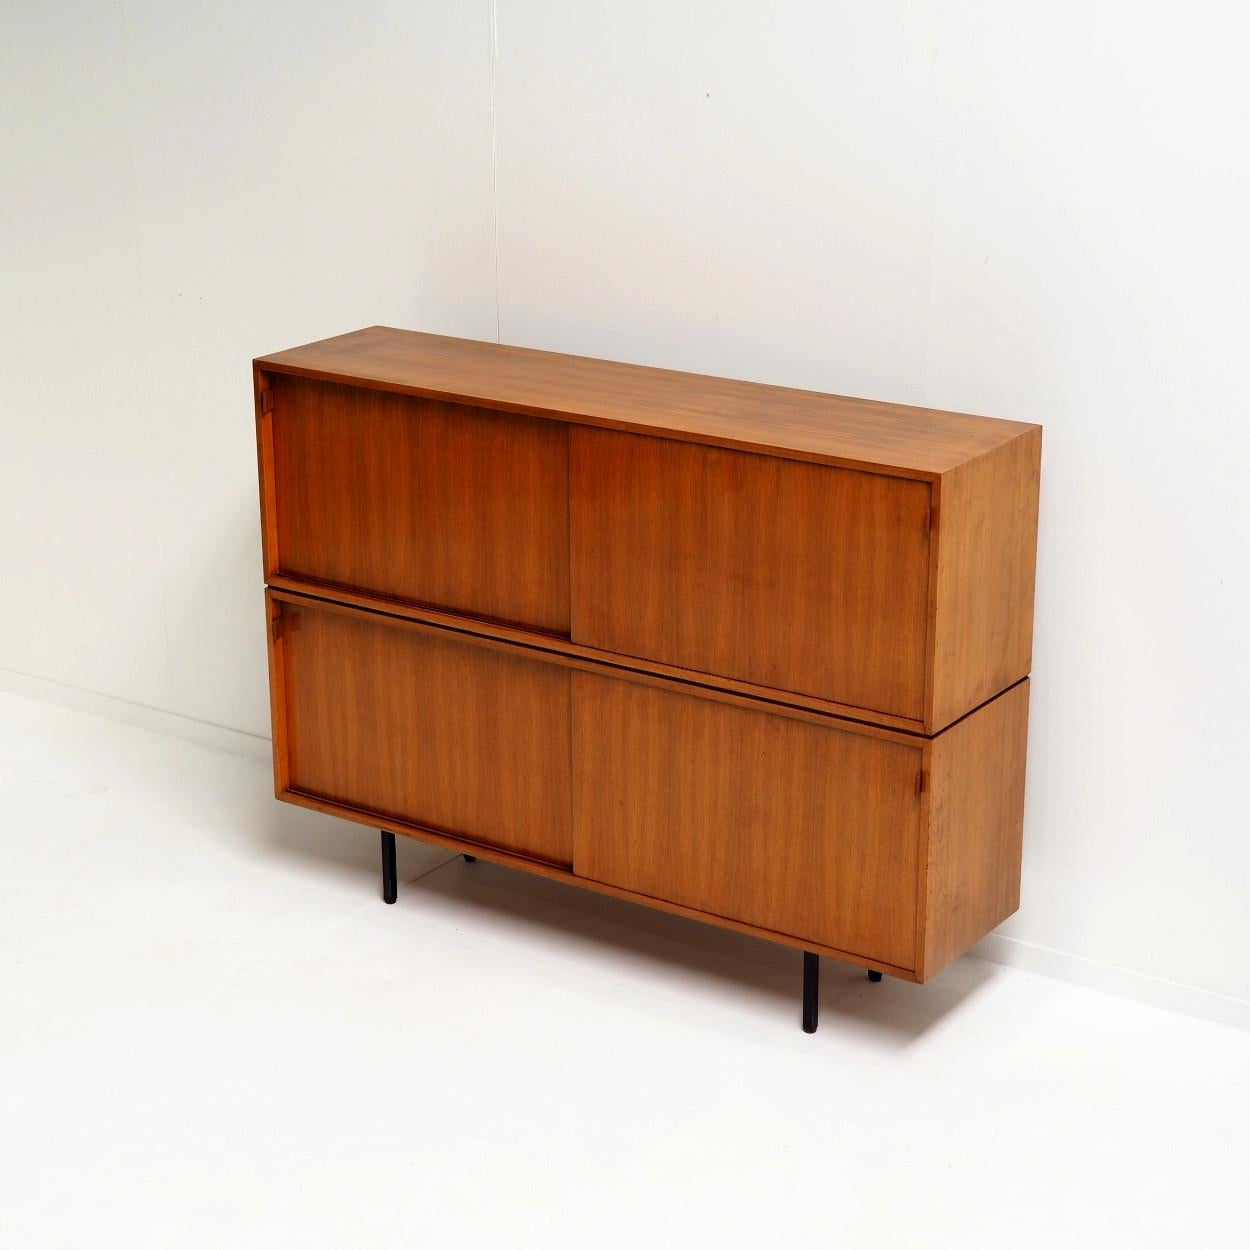 Beautiful and rare double decker sideboard designed by female designer Florence Knoll. She designed a series of these sideboards in the early 1950s which were produced until the late 70s early 80s. No longer produced today.

It was the high-end